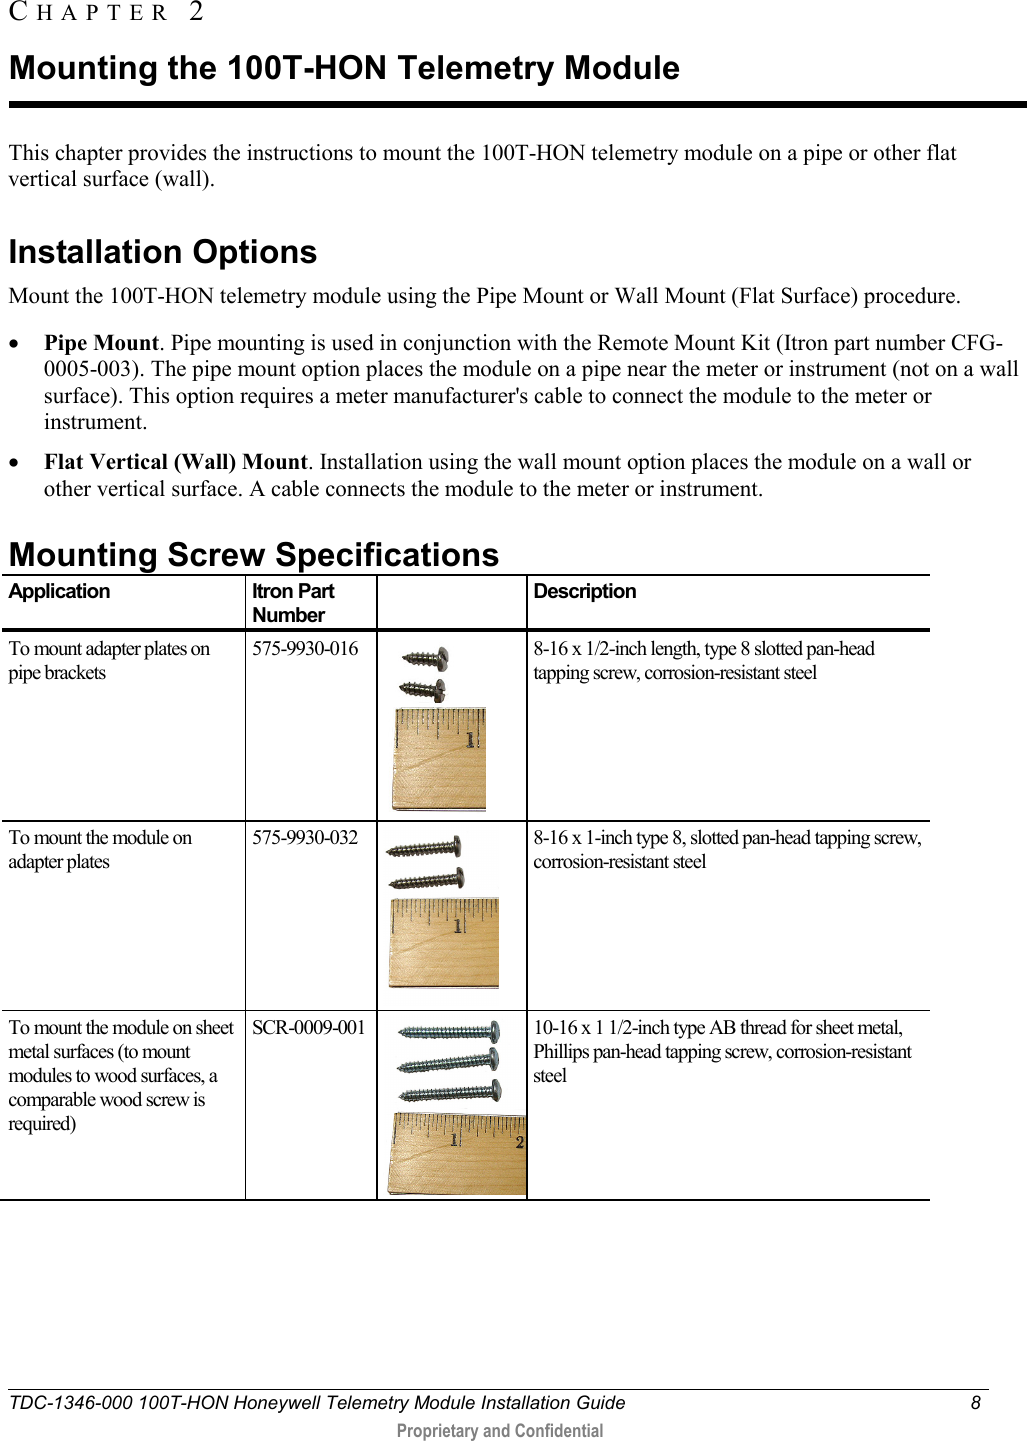  TDC-1346-000 100T-HON Honeywell Telemetry Module Installation Guide  8   Proprietary and Confidential     This chapter provides the instructions to mount the 100T-HON telemetry module on a pipe or other flat vertical surface (wall).   Installation Options Mount the 100T-HON telemetry module using the Pipe Mount or Wall Mount (Flat Surface) procedure. • Pipe Mount. Pipe mounting is used in conjunction with the Remote Mount Kit (Itron part number CFG-0005-003). The pipe mount option places the module on a pipe near the meter or instrument (not on a wall surface). This option requires a meter manufacturer&apos;s cable to connect the module to the meter or instrument. • Flat Vertical (Wall) Mount. Installation using the wall mount option places the module on a wall or other vertical surface. A cable connects the module to the meter or instrument.   Mounting Screw Specifications Application Itron Part Number  Description To mount adapter plates on pipe brackets 575-9930-016  8-16 x 1/2-inch length, type 8 slotted pan-head tapping screw, corrosion-resistant steel To mount the module on adapter plates 575-9930-032  8-16 x 1-inch type 8, slotted pan-head tapping screw, corrosion-resistant steel To mount the module on sheet metal surfaces (to mount modules to wood surfaces, a comparable wood screw is required) SCR-0009-001  10-16 x 1 1/2-inch type AB thread for sheet metal, Phillips pan-head tapping screw, corrosion-resistant steel   CHAPTER  2  Mounting the 100T-HON Telemetry Module 